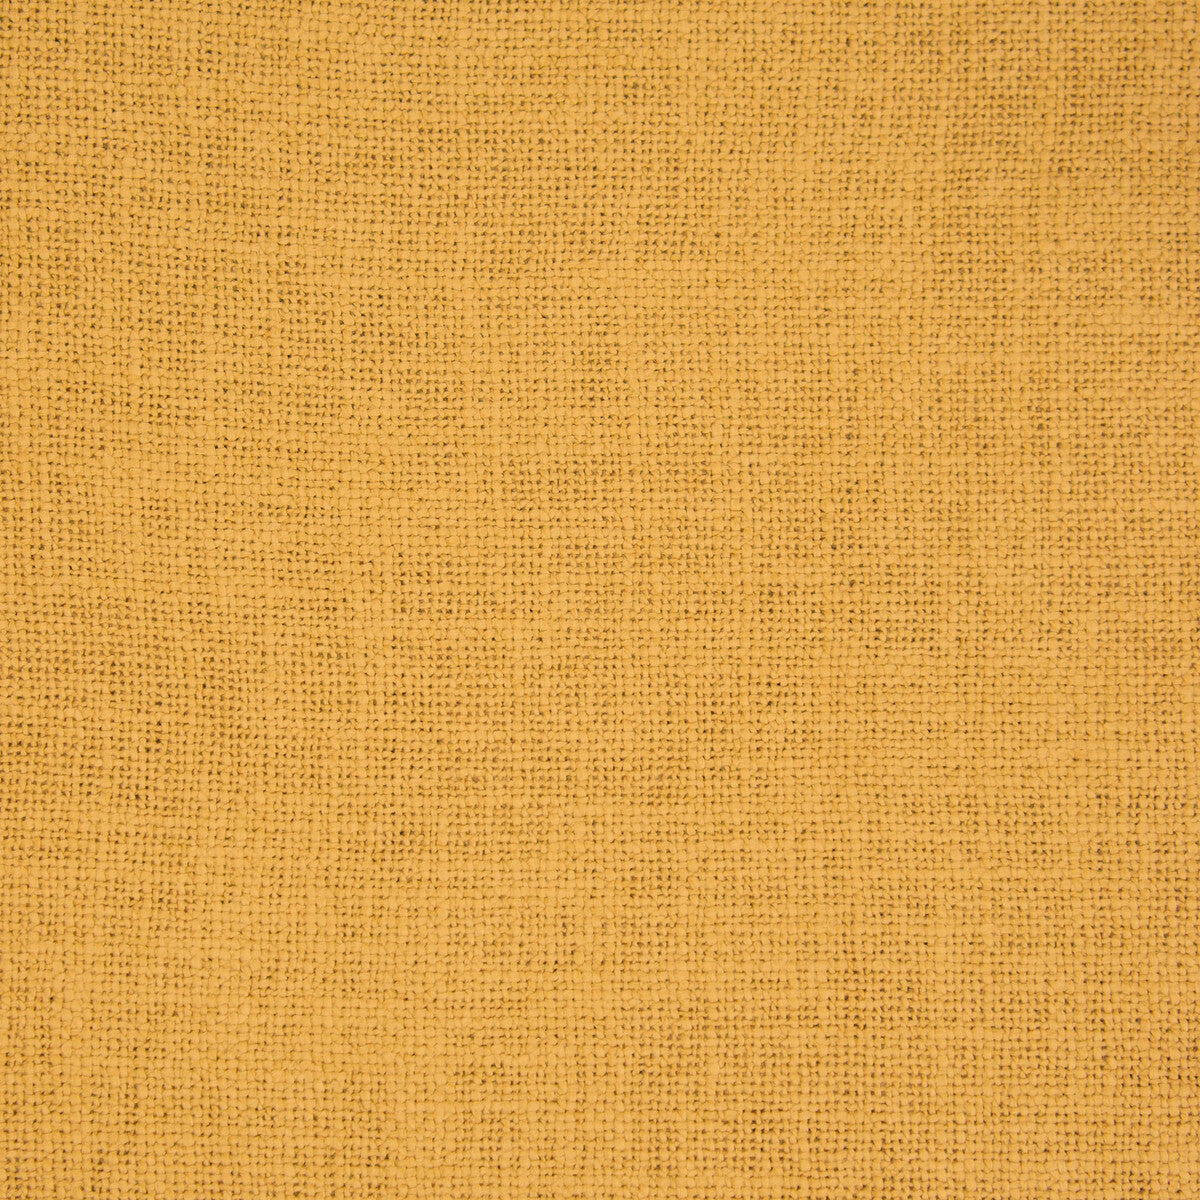 Bellver fabric in ocre color - pattern GDT5676.014.0 - by Gaston y Daniela in the Gaston Maiorica collection